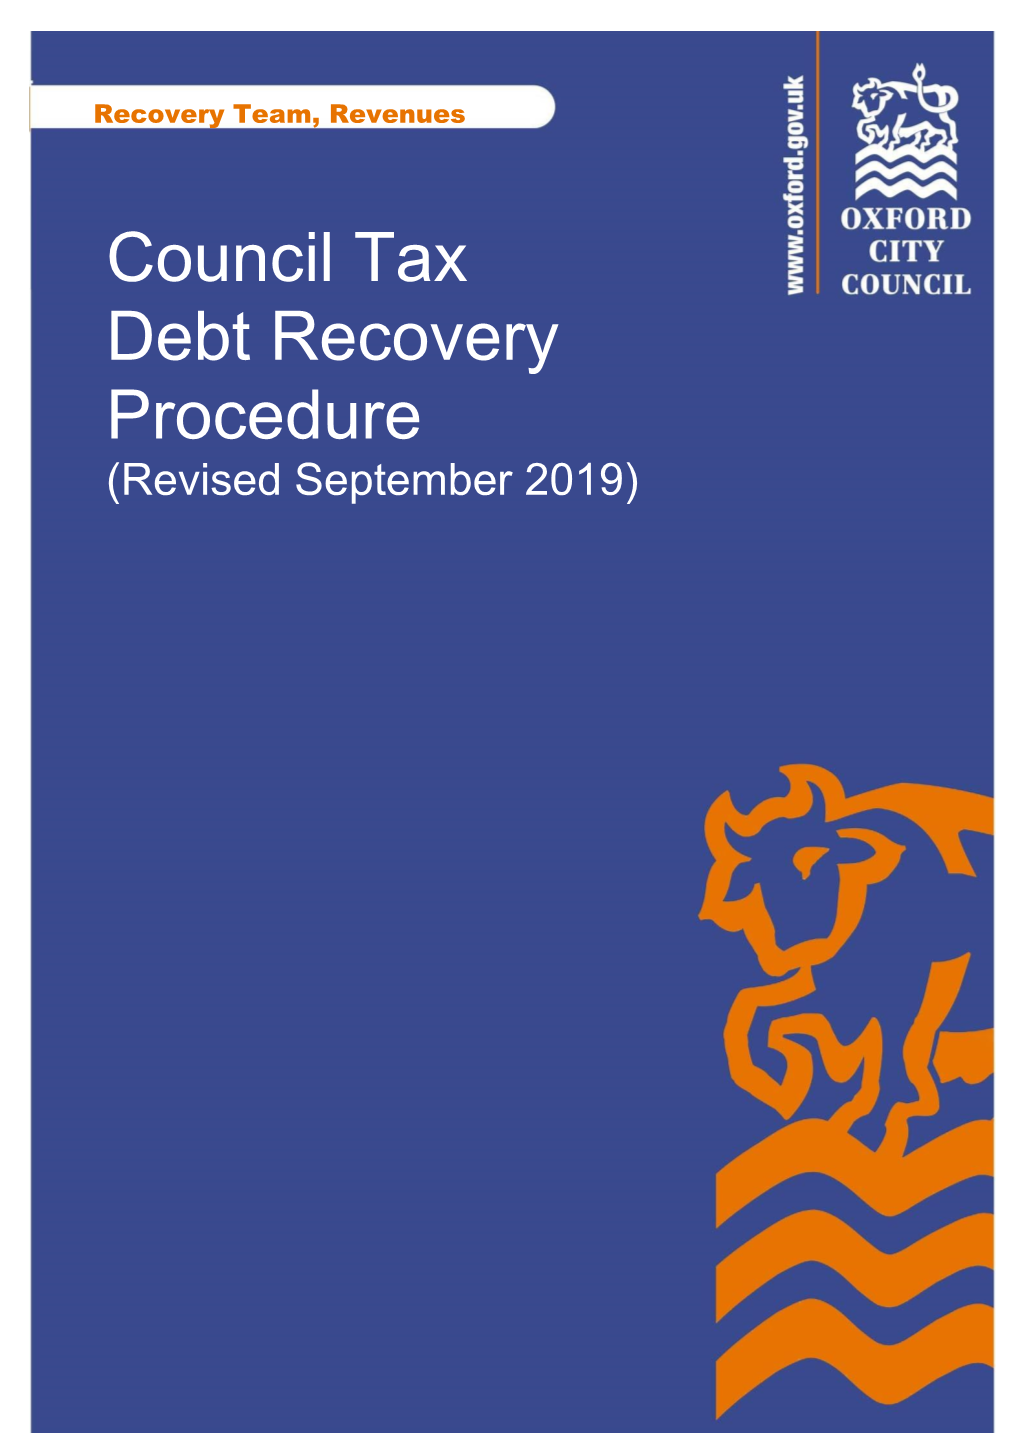 Council Tax Debt Recovery Procedure (Revised September 2019)